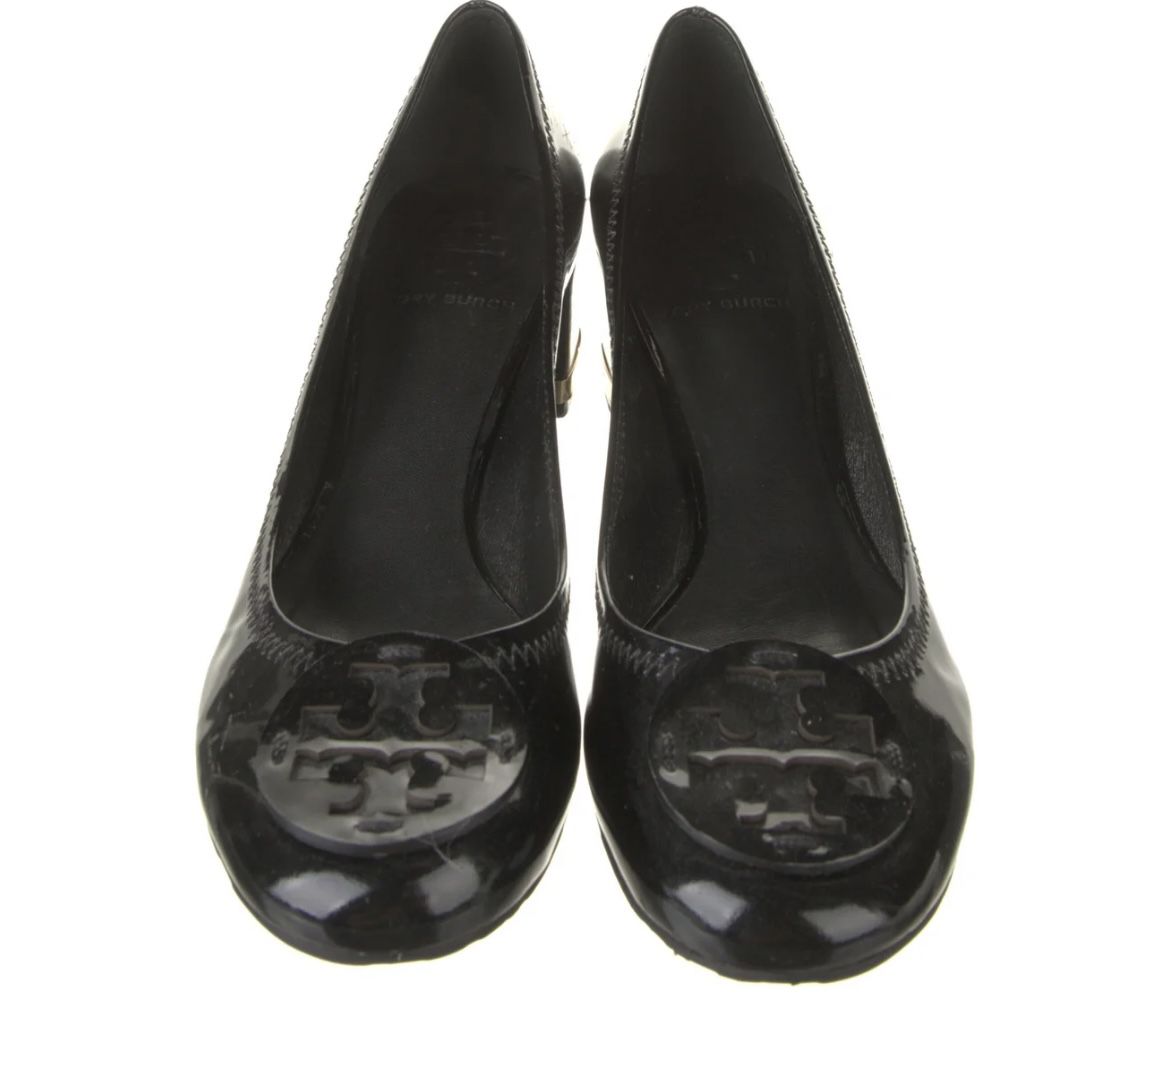 Tory Burch Patent Leather Pumps